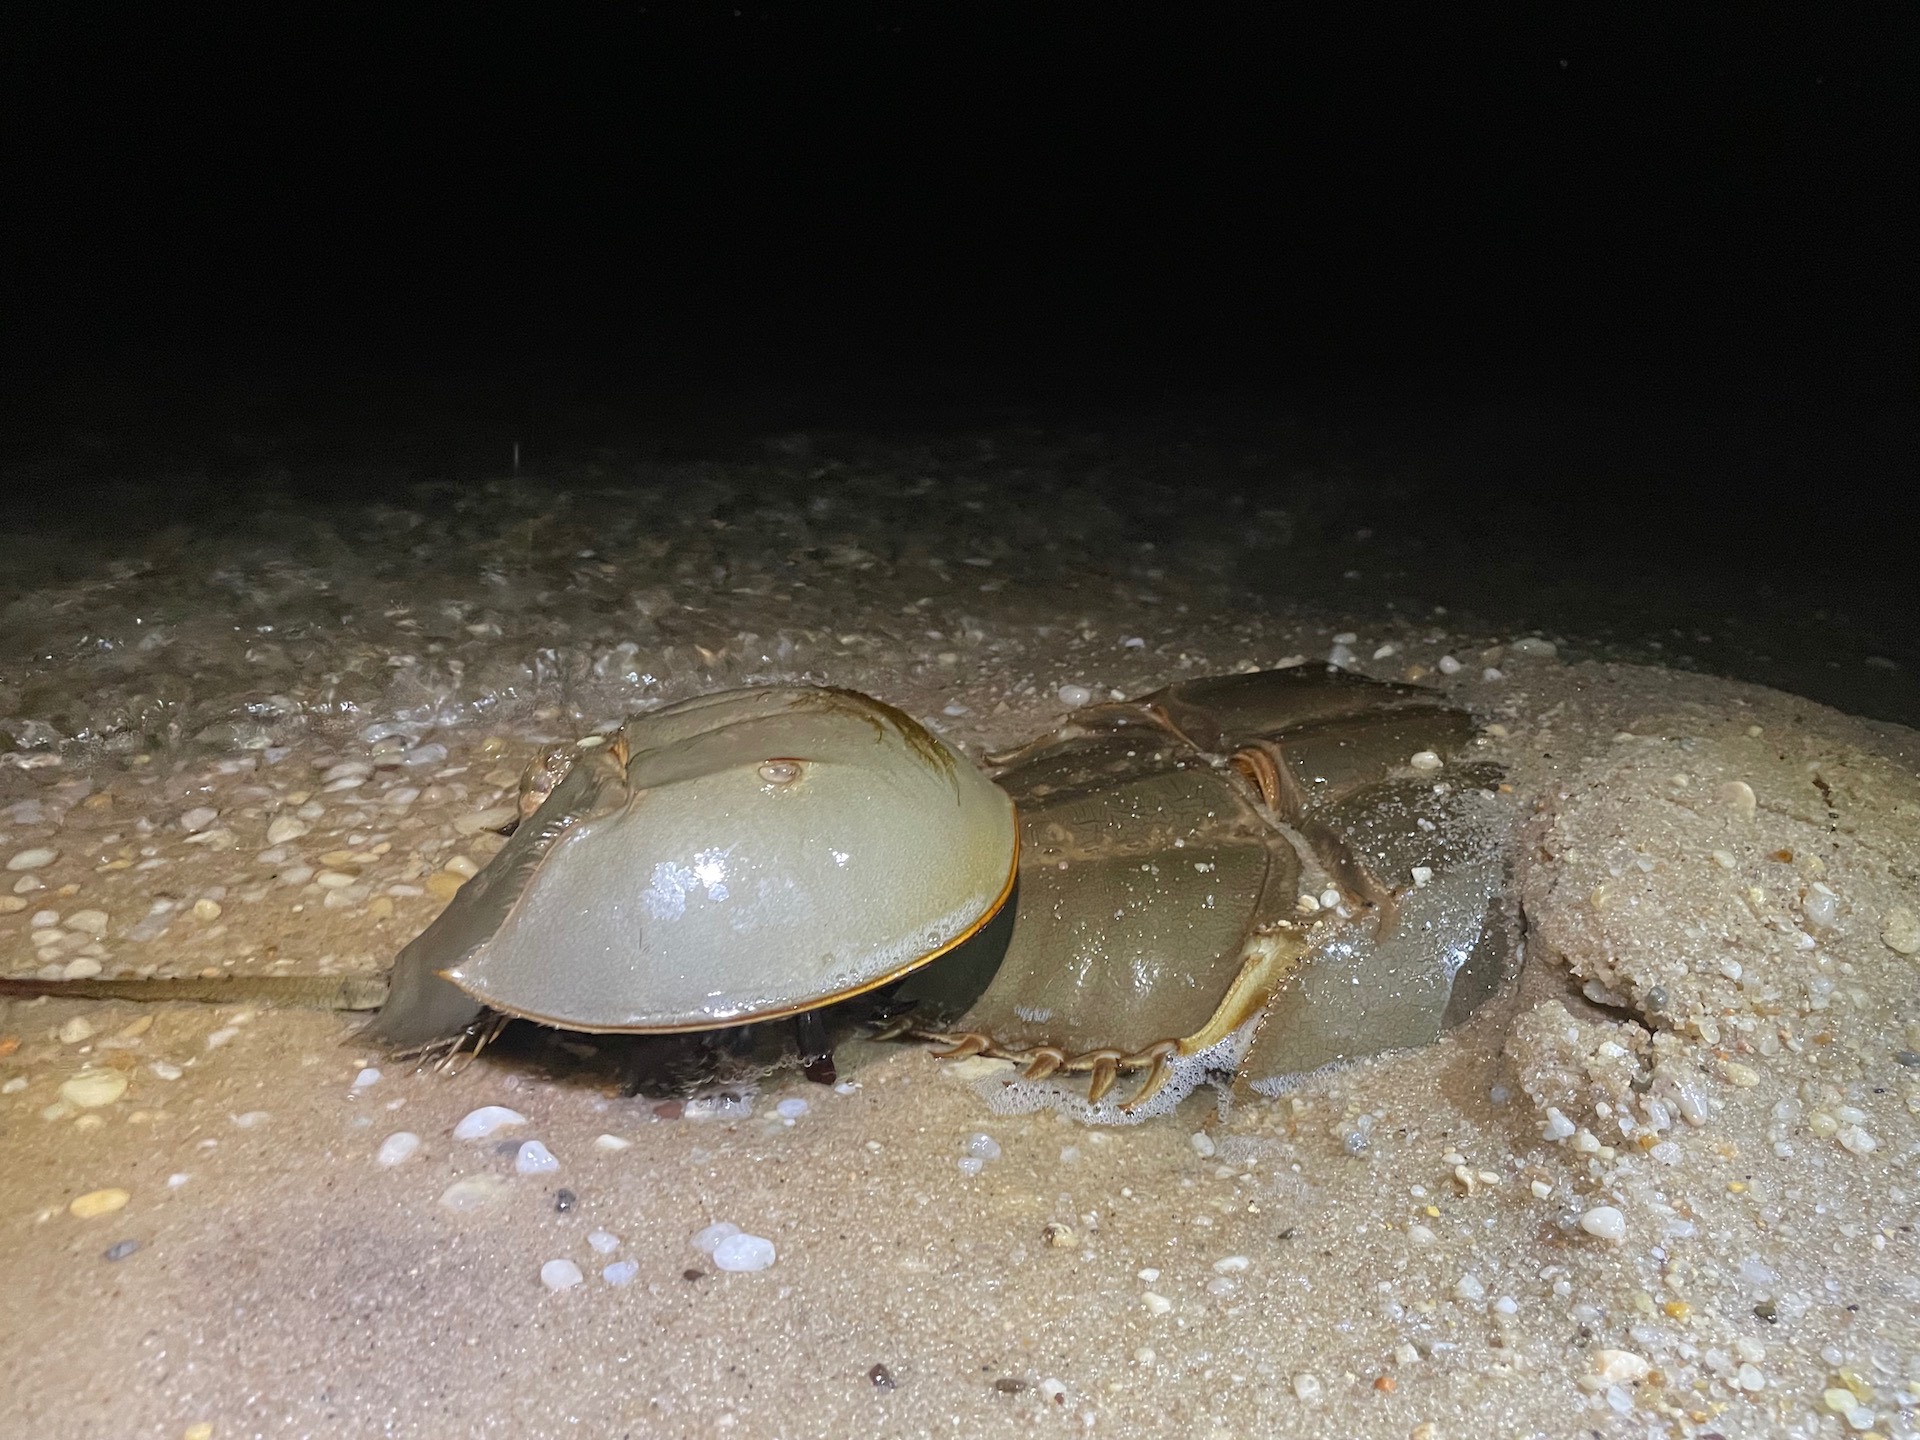 Horseshoe crabs spawning in shallow water